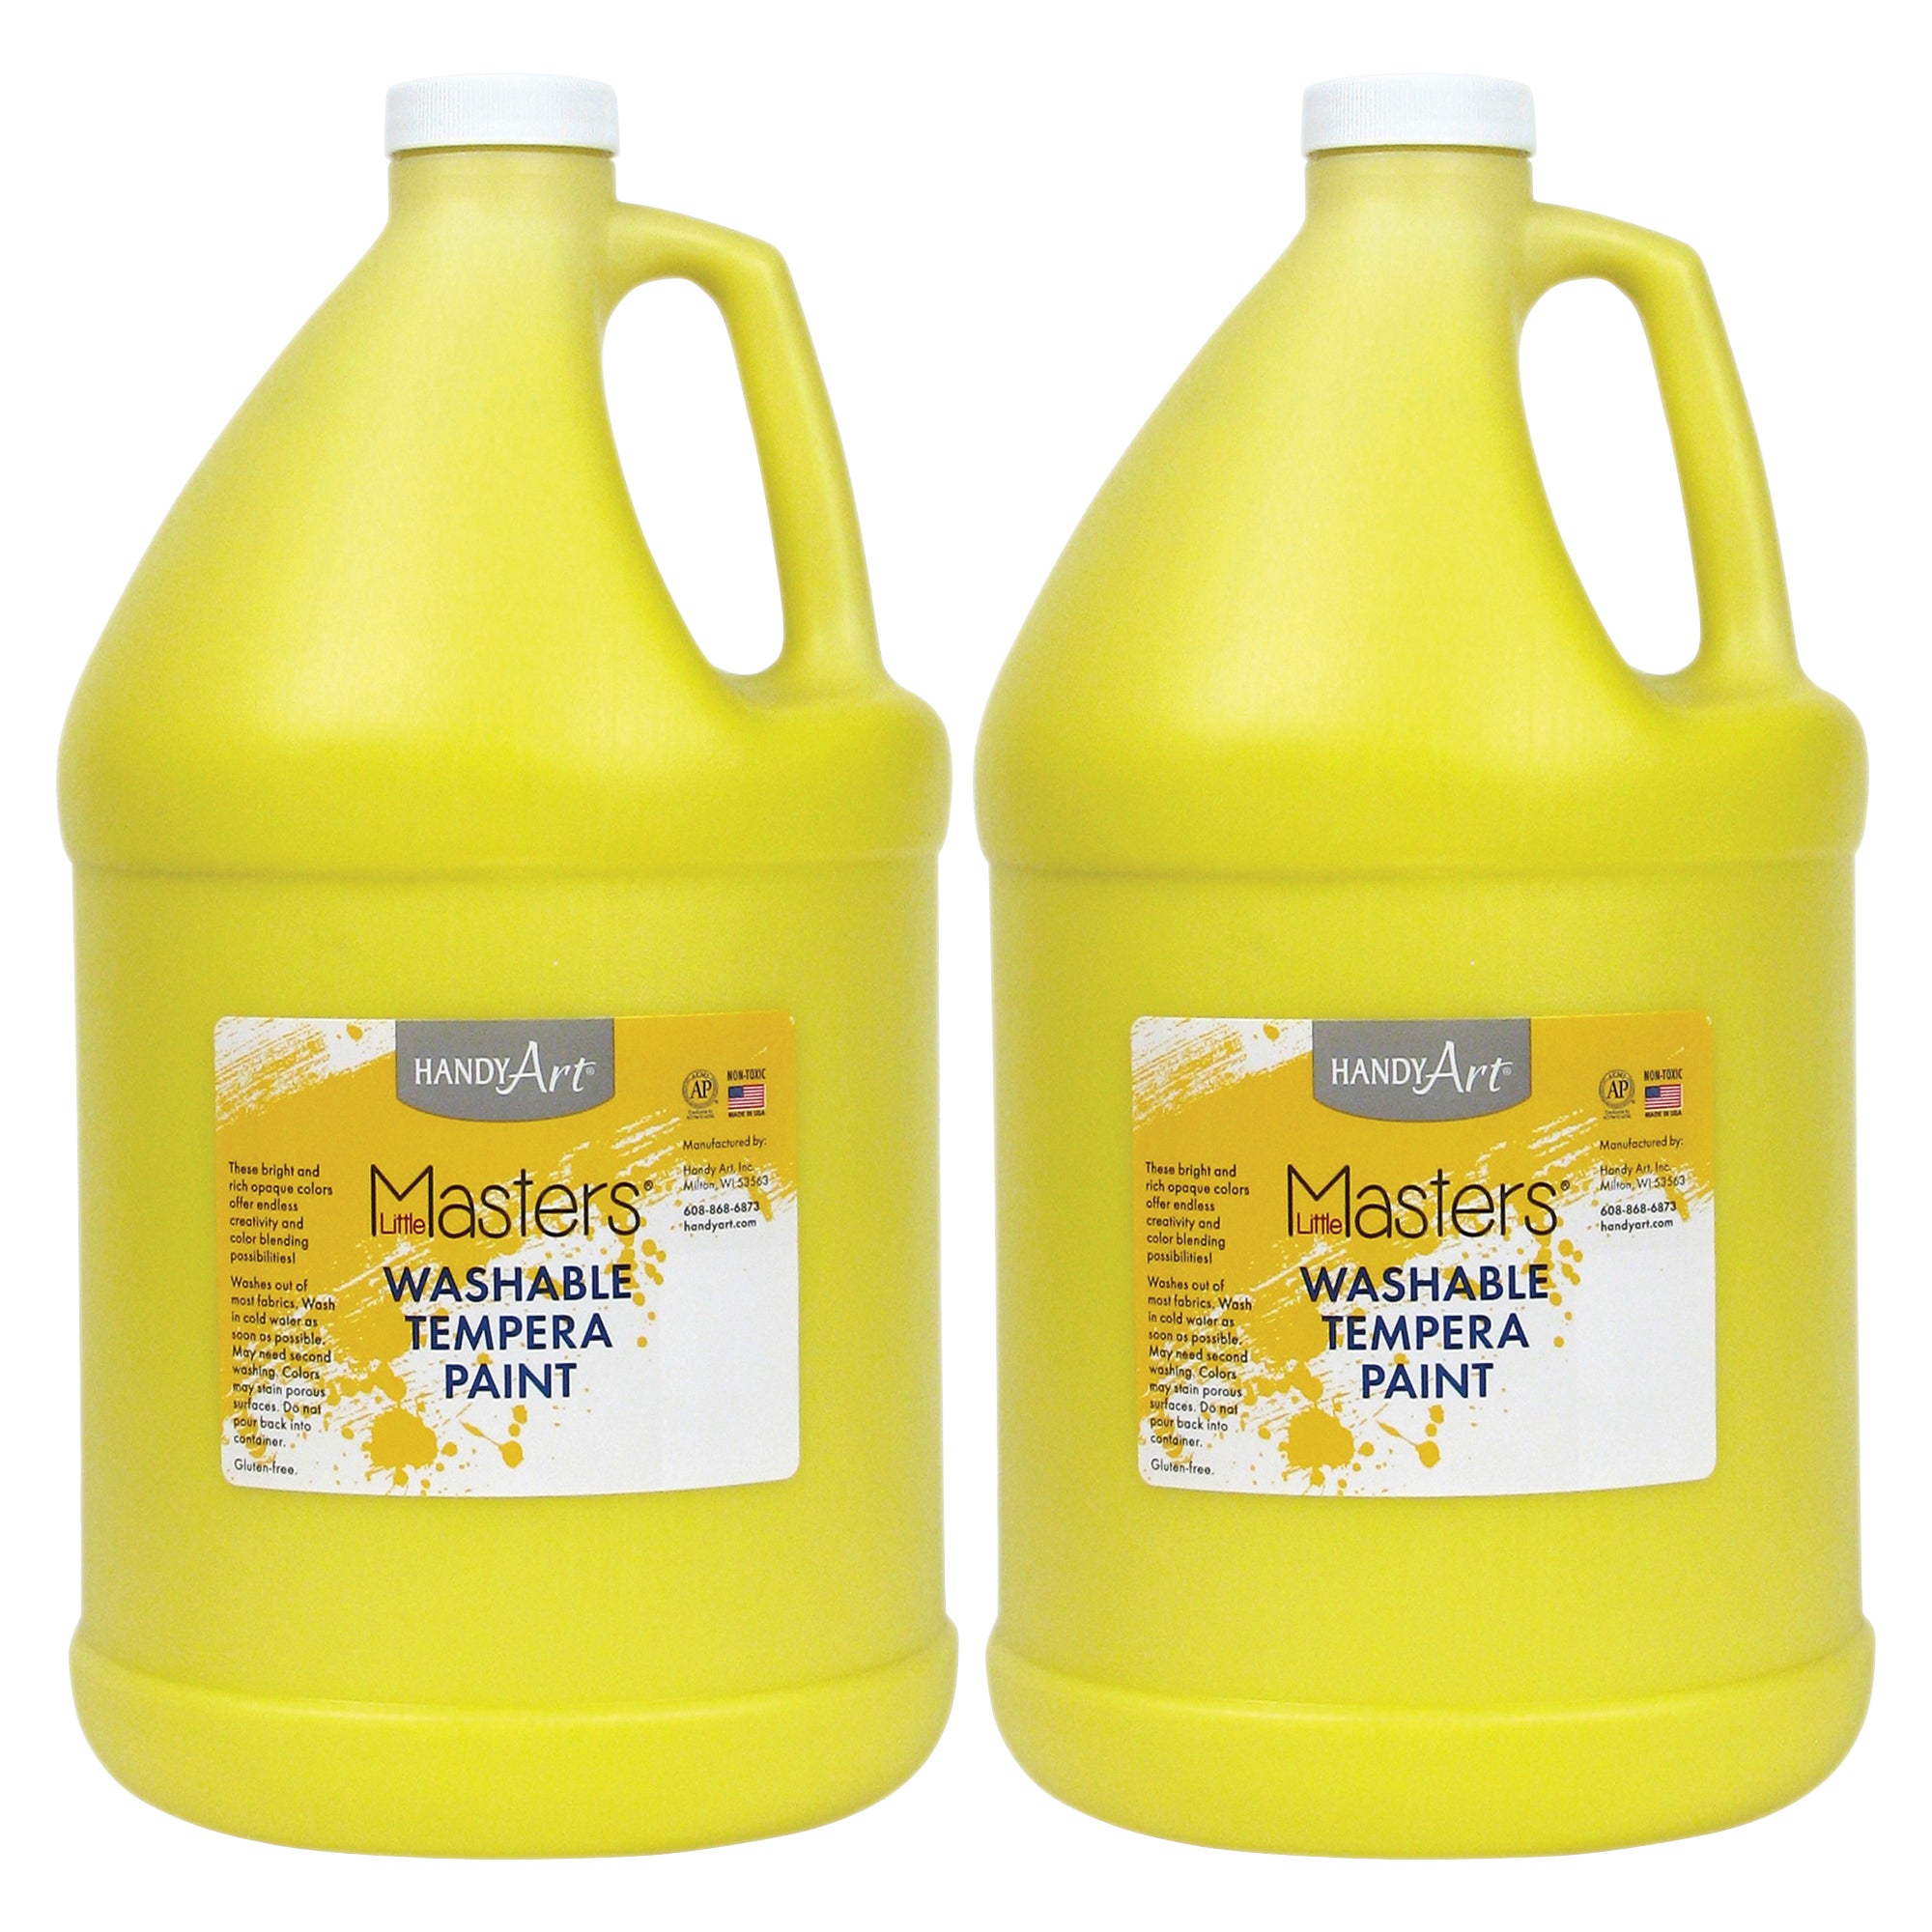 Little Masters® Washable Tempera Paint, Yellow, Gallon, Pack of 2